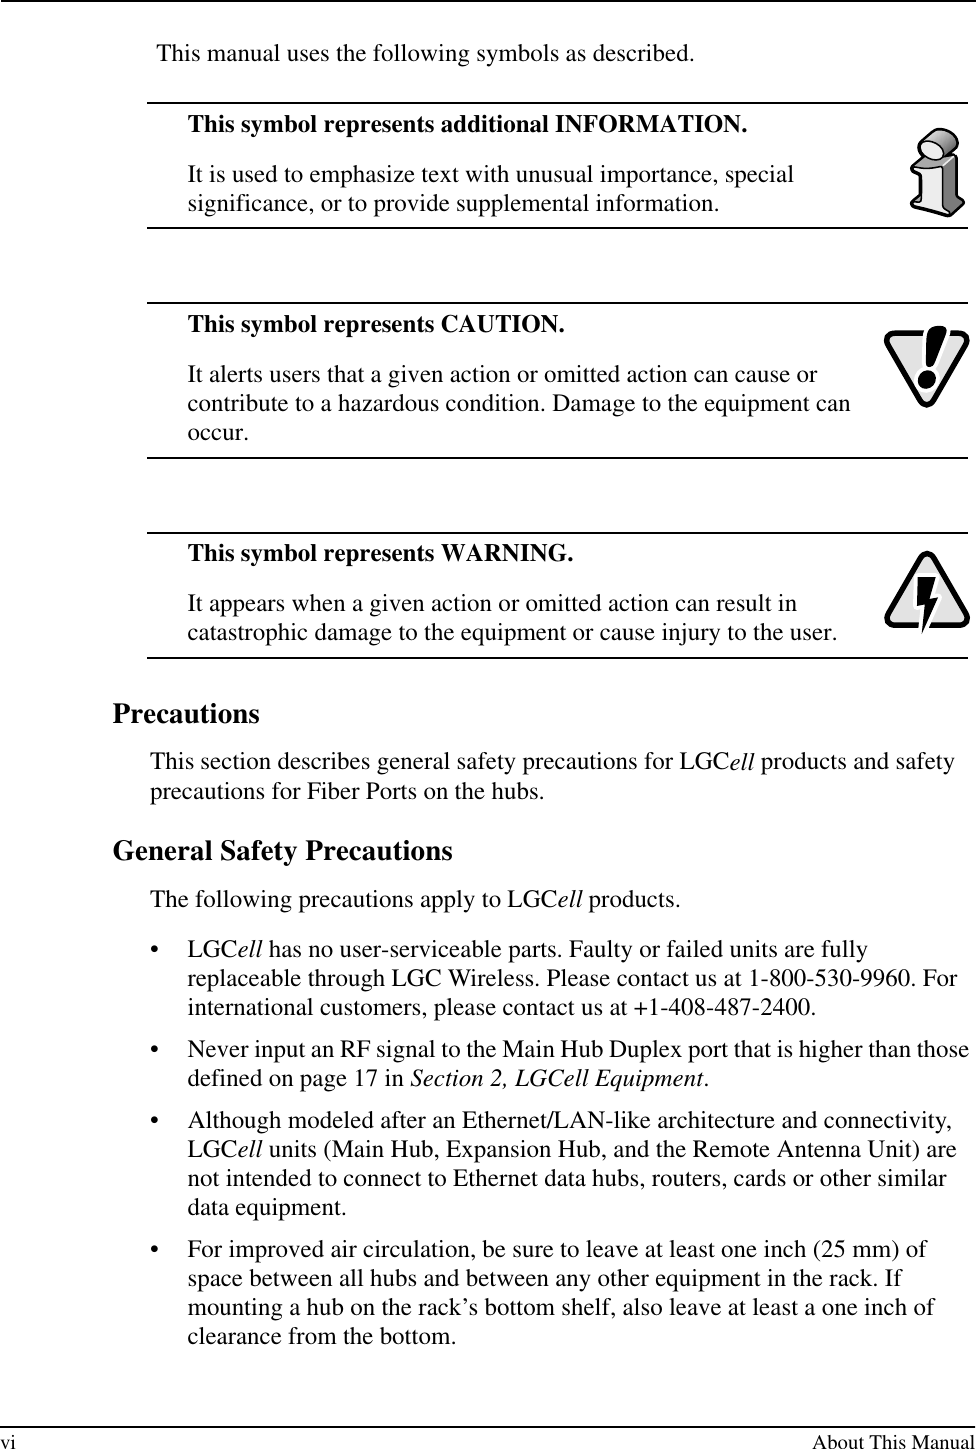 vi About This Manual This manual uses the following symbols as described.This symbol represents additional INFORMATION.It is used to emphasize text with unusual importance, special significance, or to provide supplemental information.This symbol represents CAUTION.It alerts users that a given action or omitted action can cause or contribute to a hazardous condition. Damage to the equipment can occur.This symbol represents WARNING.It appears when a given action or omitted action can result in catastrophic damage to the equipment or cause injury to the user. PrecautionsThis section describes general safety precautions for LGCell products and safety precautions for Fiber Ports on the hubs.General Safety PrecautionsThe following precautions apply to LGCell products.•LGCell has no user-serviceable parts. Faulty or failed units are fully replaceable through LGC Wireless. Please contact us at 1-800-530-9960. For international customers, please contact us at +1-408-487-2400.•Never input an RF signal to the Main Hub Duplex port that is higher than those defined on page 17 in Section 2, LGCell Equipment.•Although modeled after an Ethernet/LAN-like architecture and connectivity, LGCell units (Main Hub, Expansion Hub, and the Remote Antenna Unit) are not intended to connect to Ethernet data hubs, routers, cards or other similar data equipment.•For improved air circulation, be sure to leave at least one inch (25 mm) of space between all hubs and between any other equipment in the rack. If mounting a hub on the rack’s bottom shelf, also leave at least a one inch of clearance from the bottom.